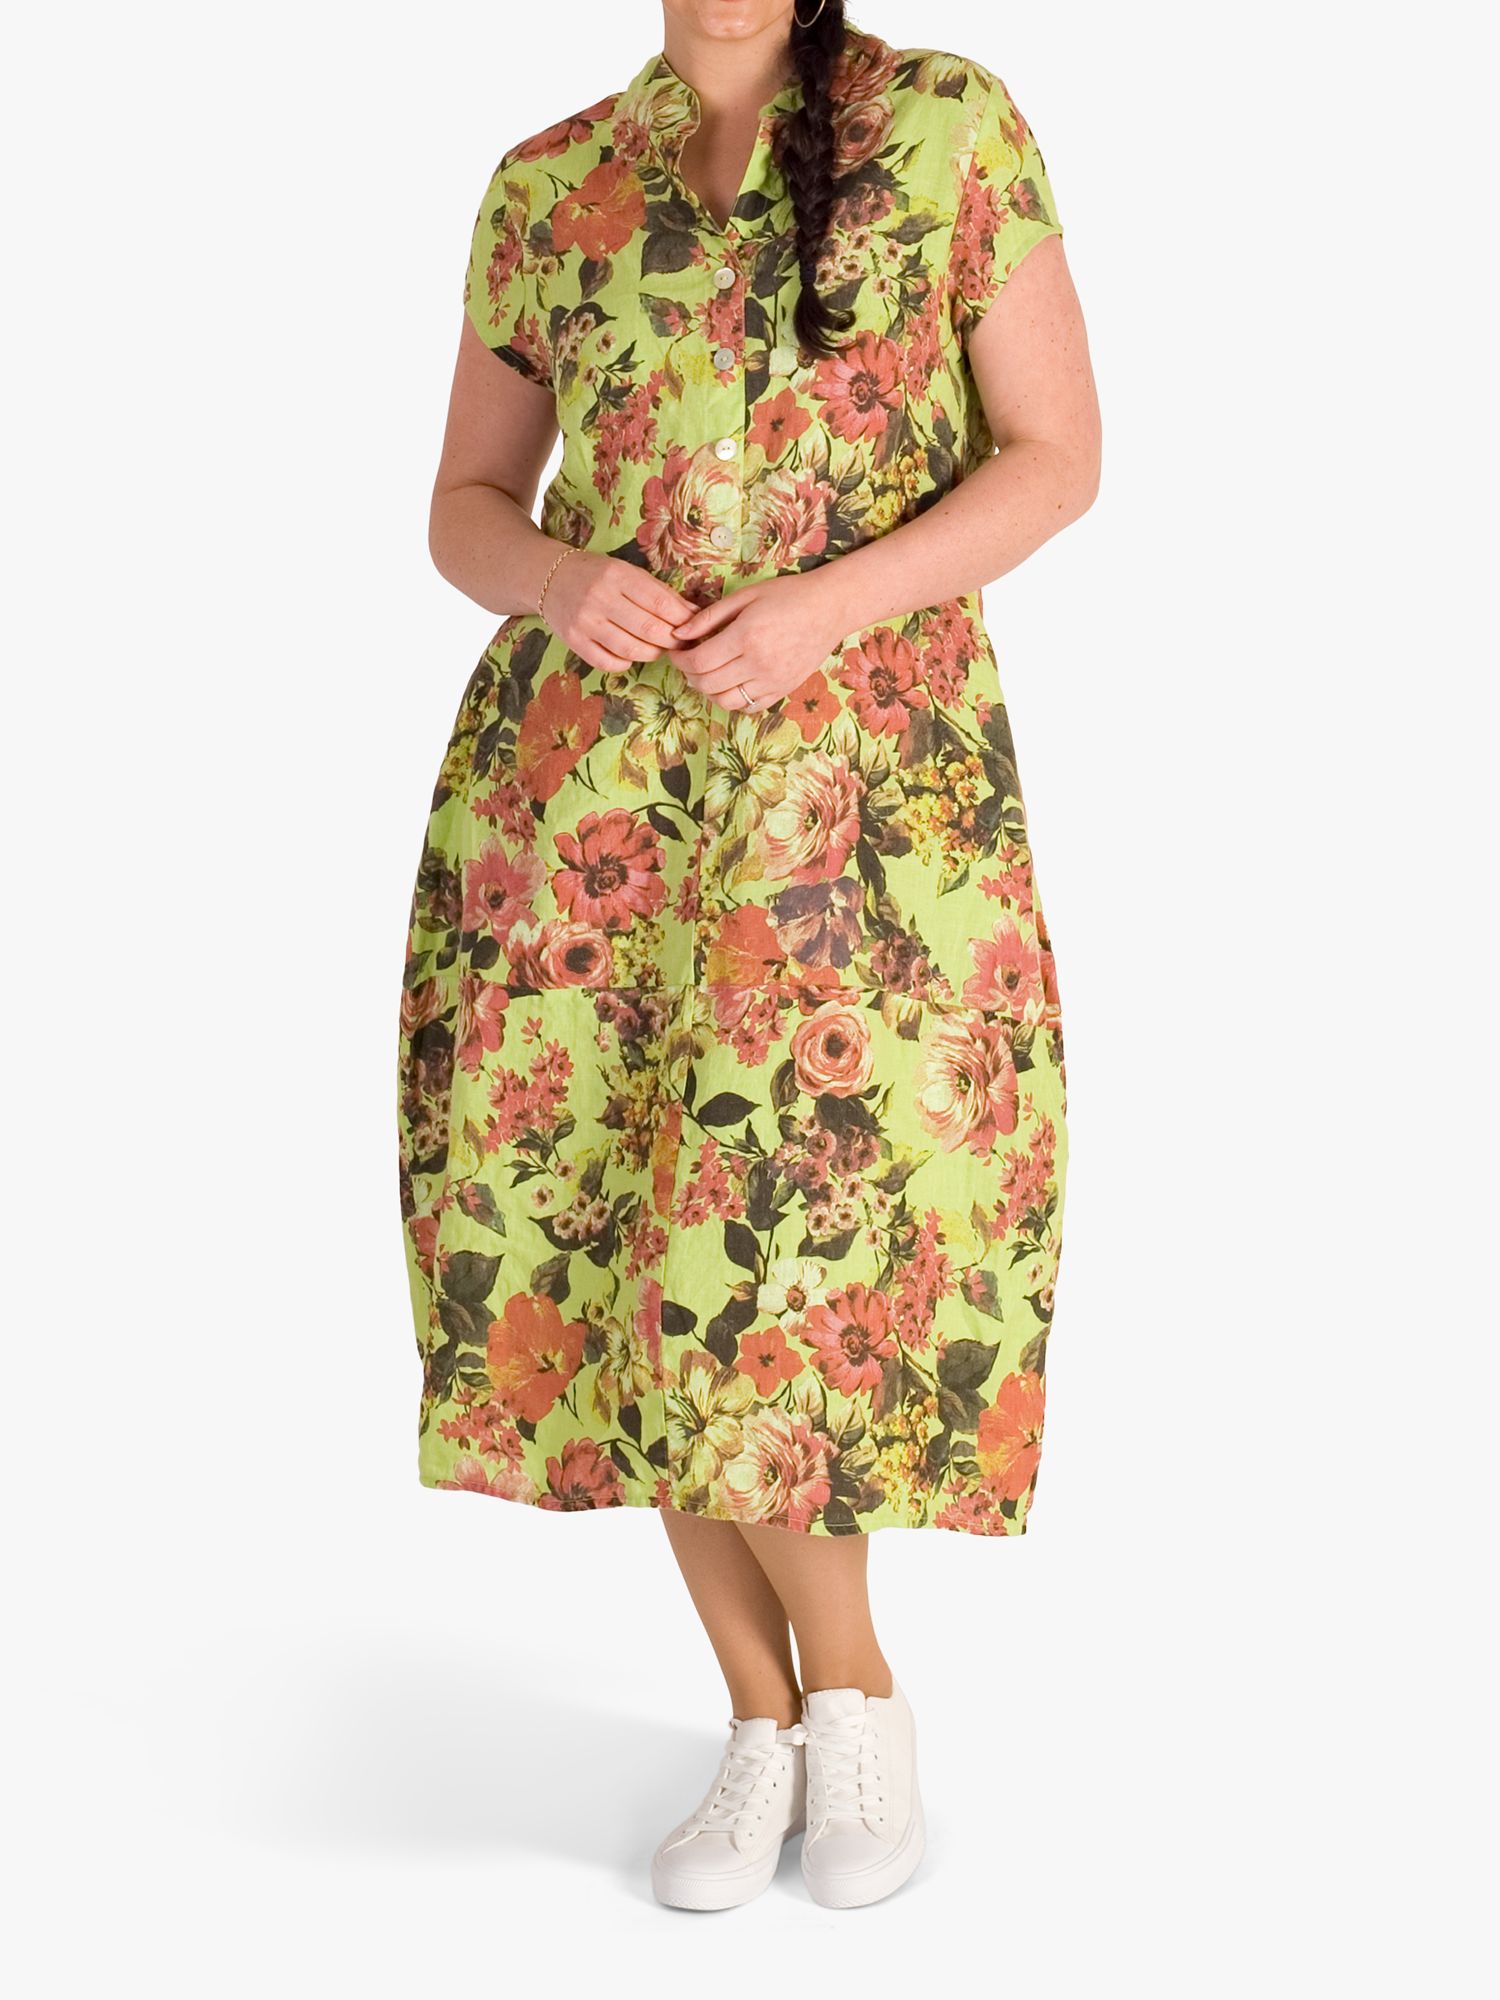 chesca Linen Floral Cocoon Midi Dress, Lime, 12-14